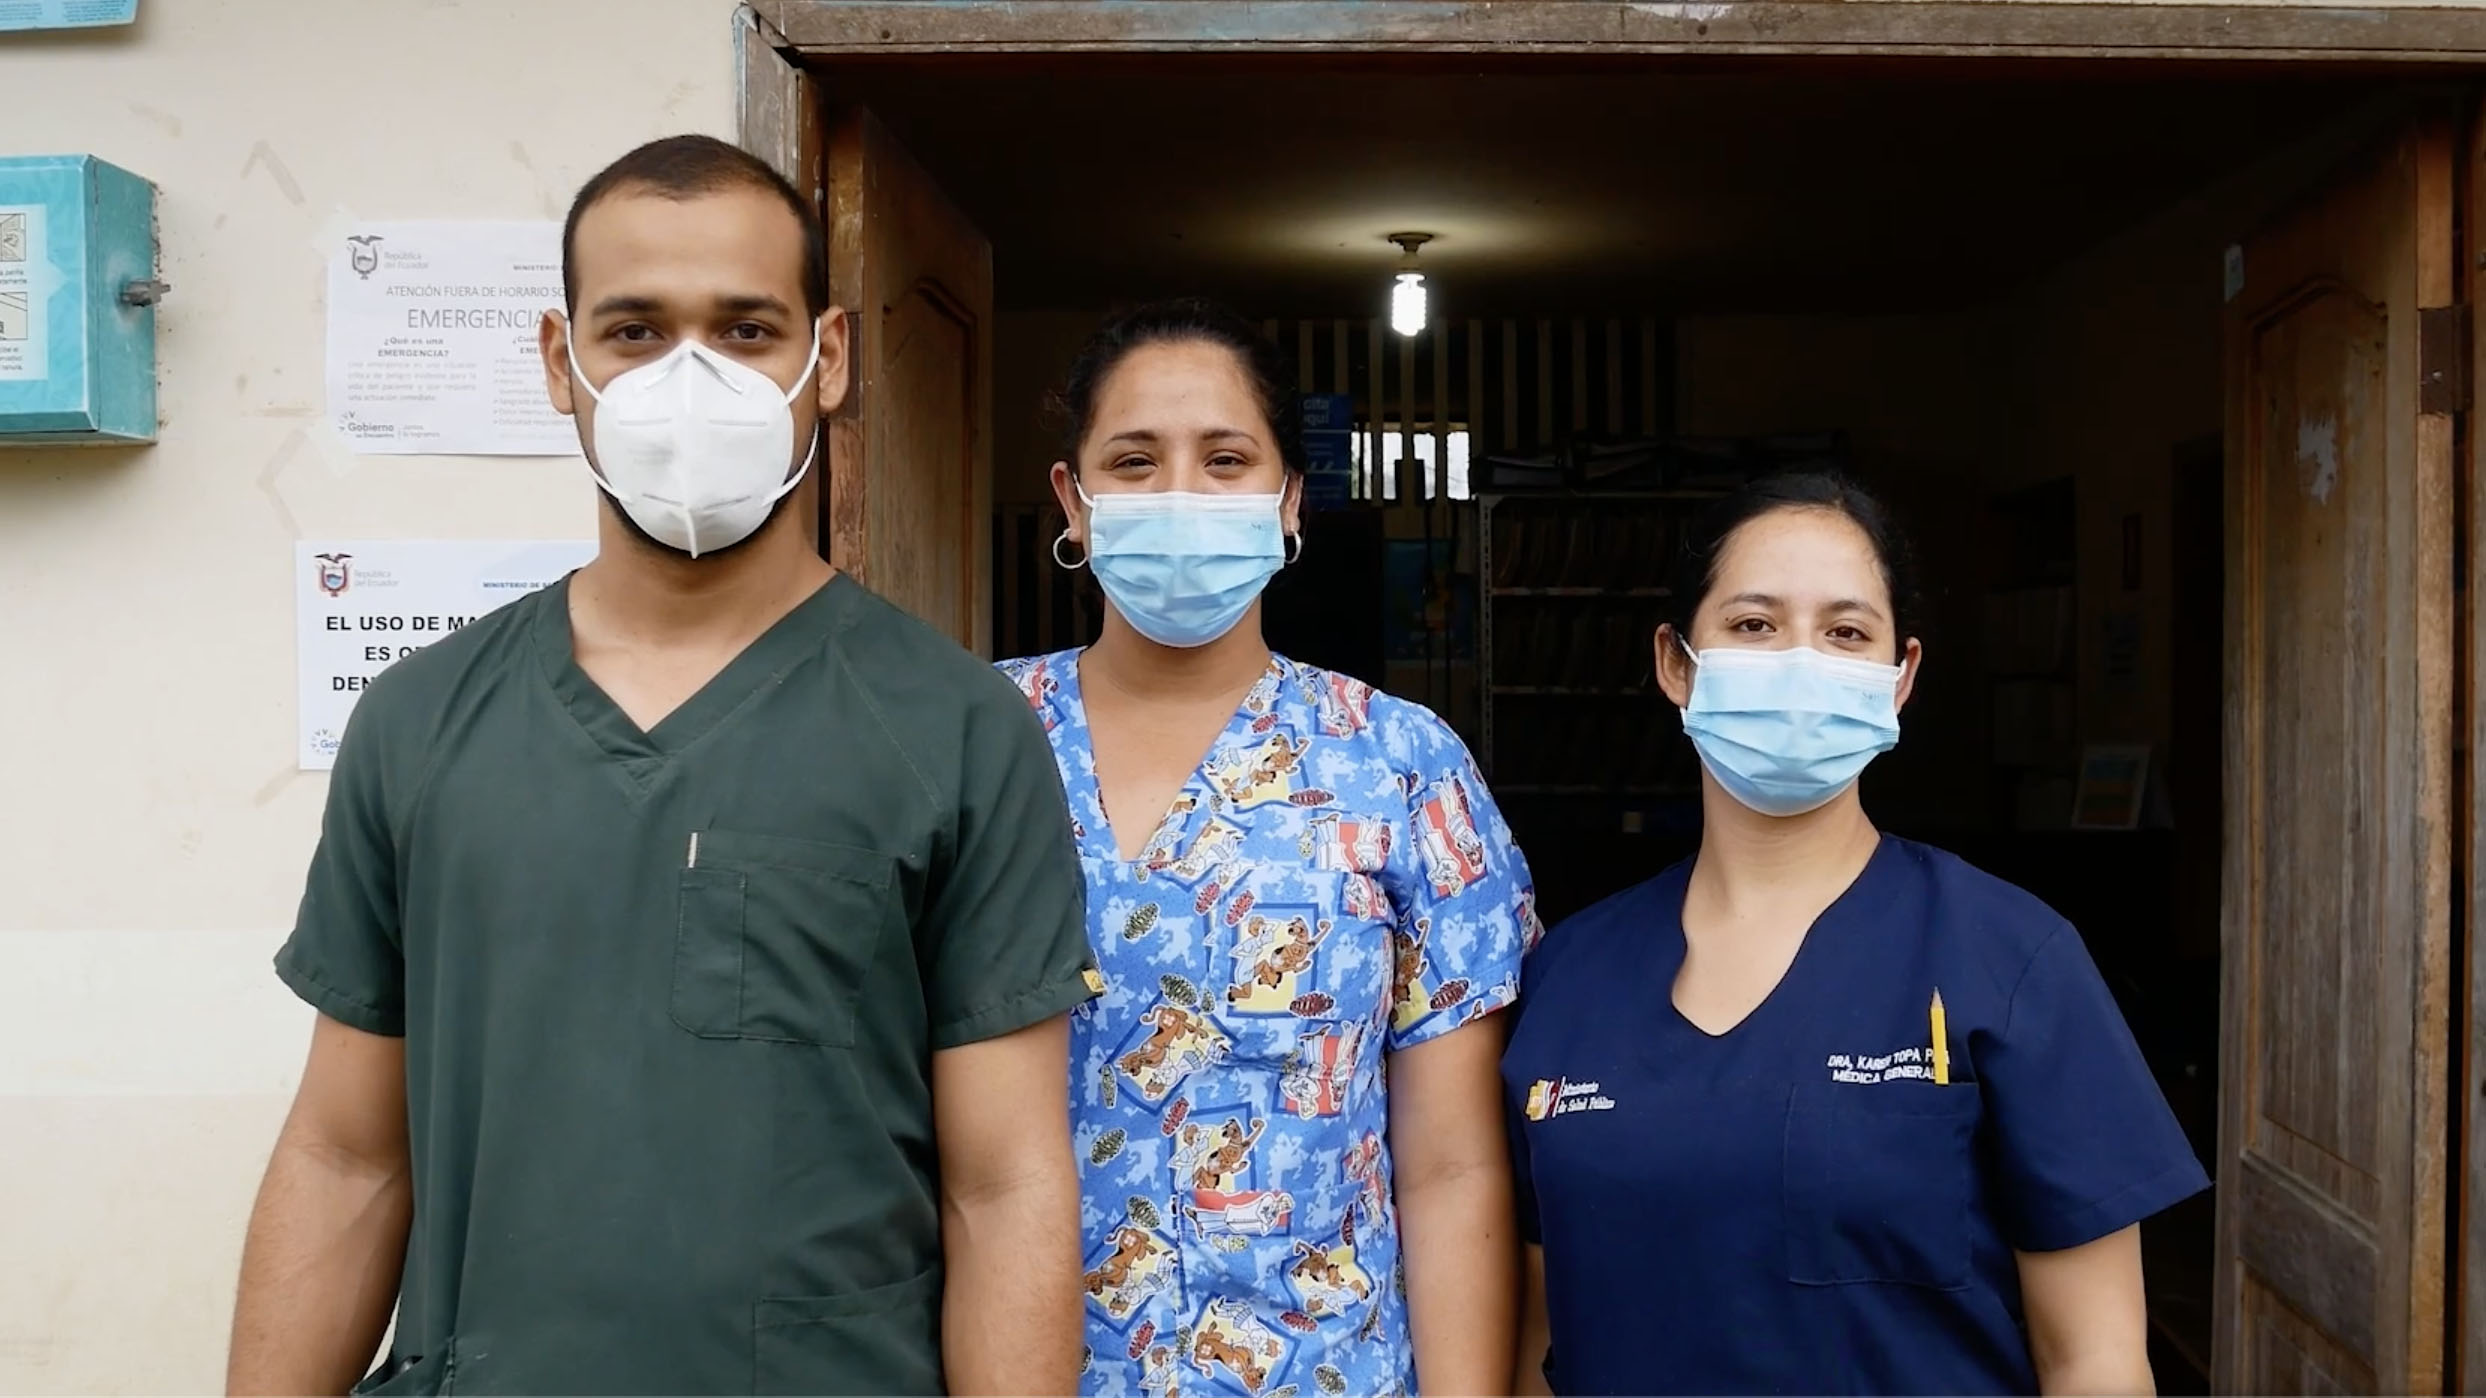 Health care staff in a remote clinic struggle to provide pandemic resources for their patients. VISUALS: Kata Karath for Undark